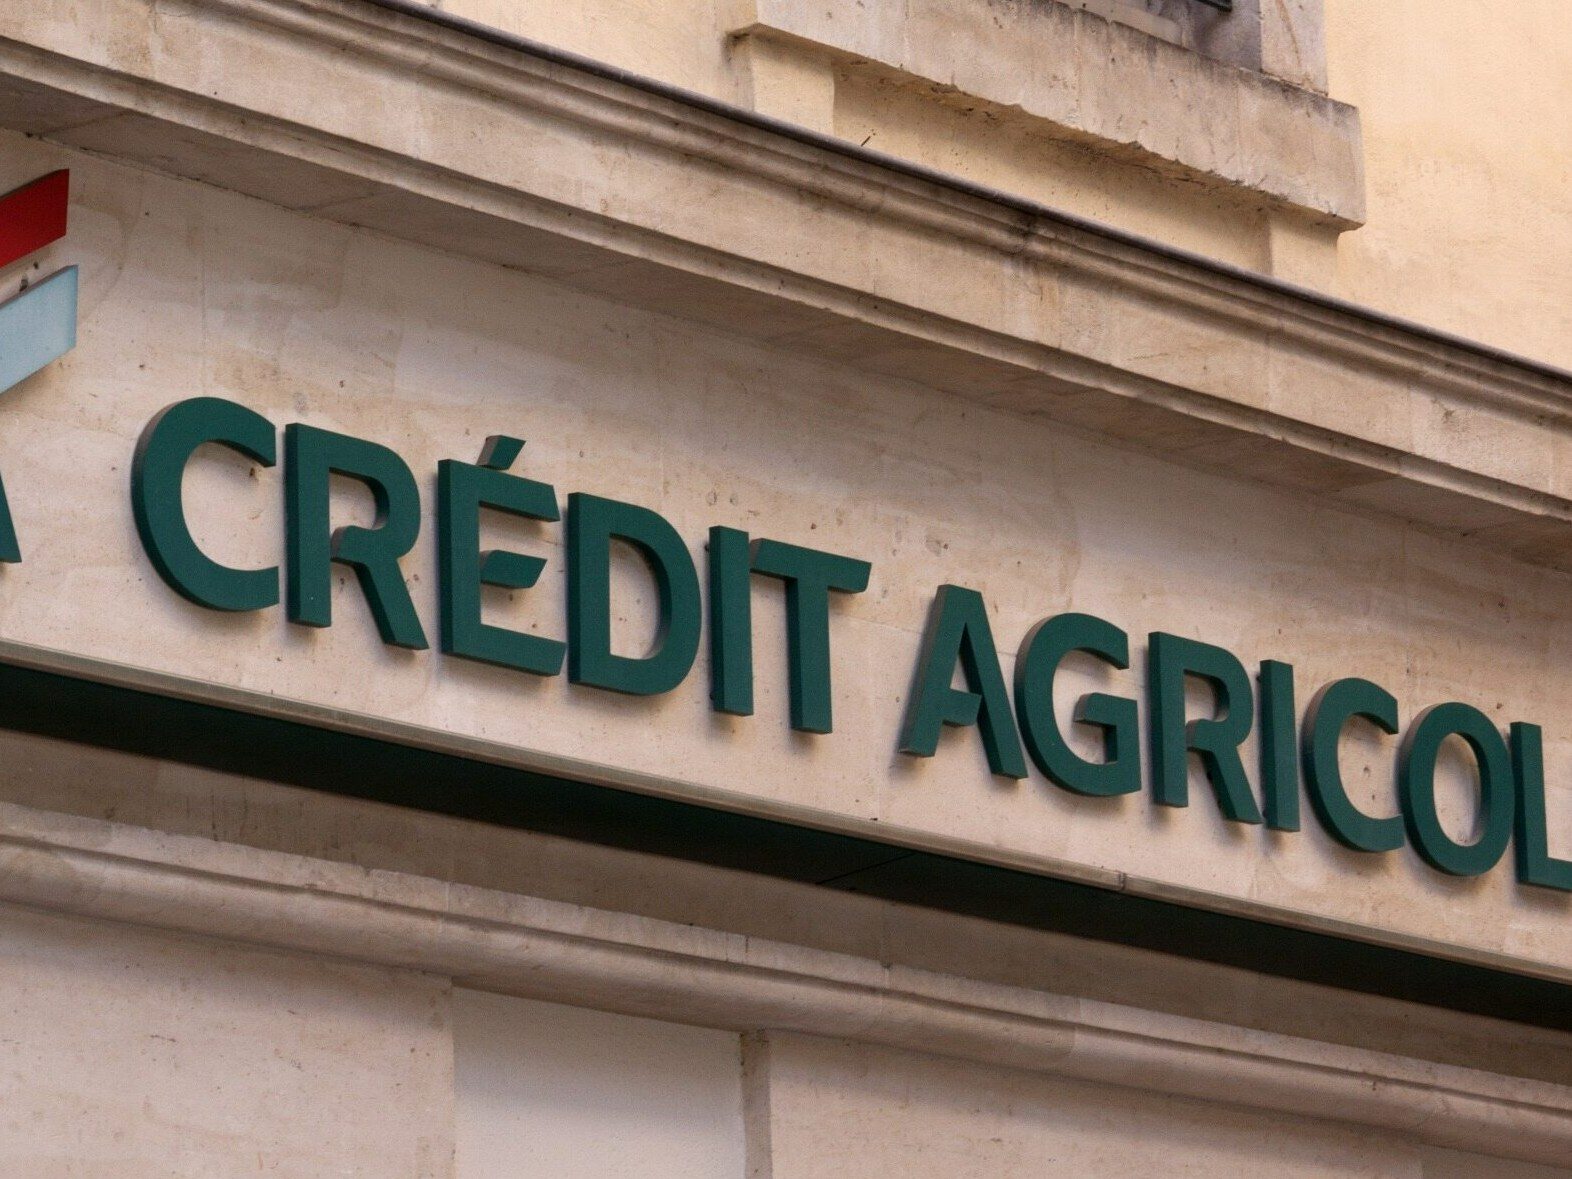 PLN 7 million fine for Credit Agricole.  The Ministry of Finance relies on the act on supporting terrorism